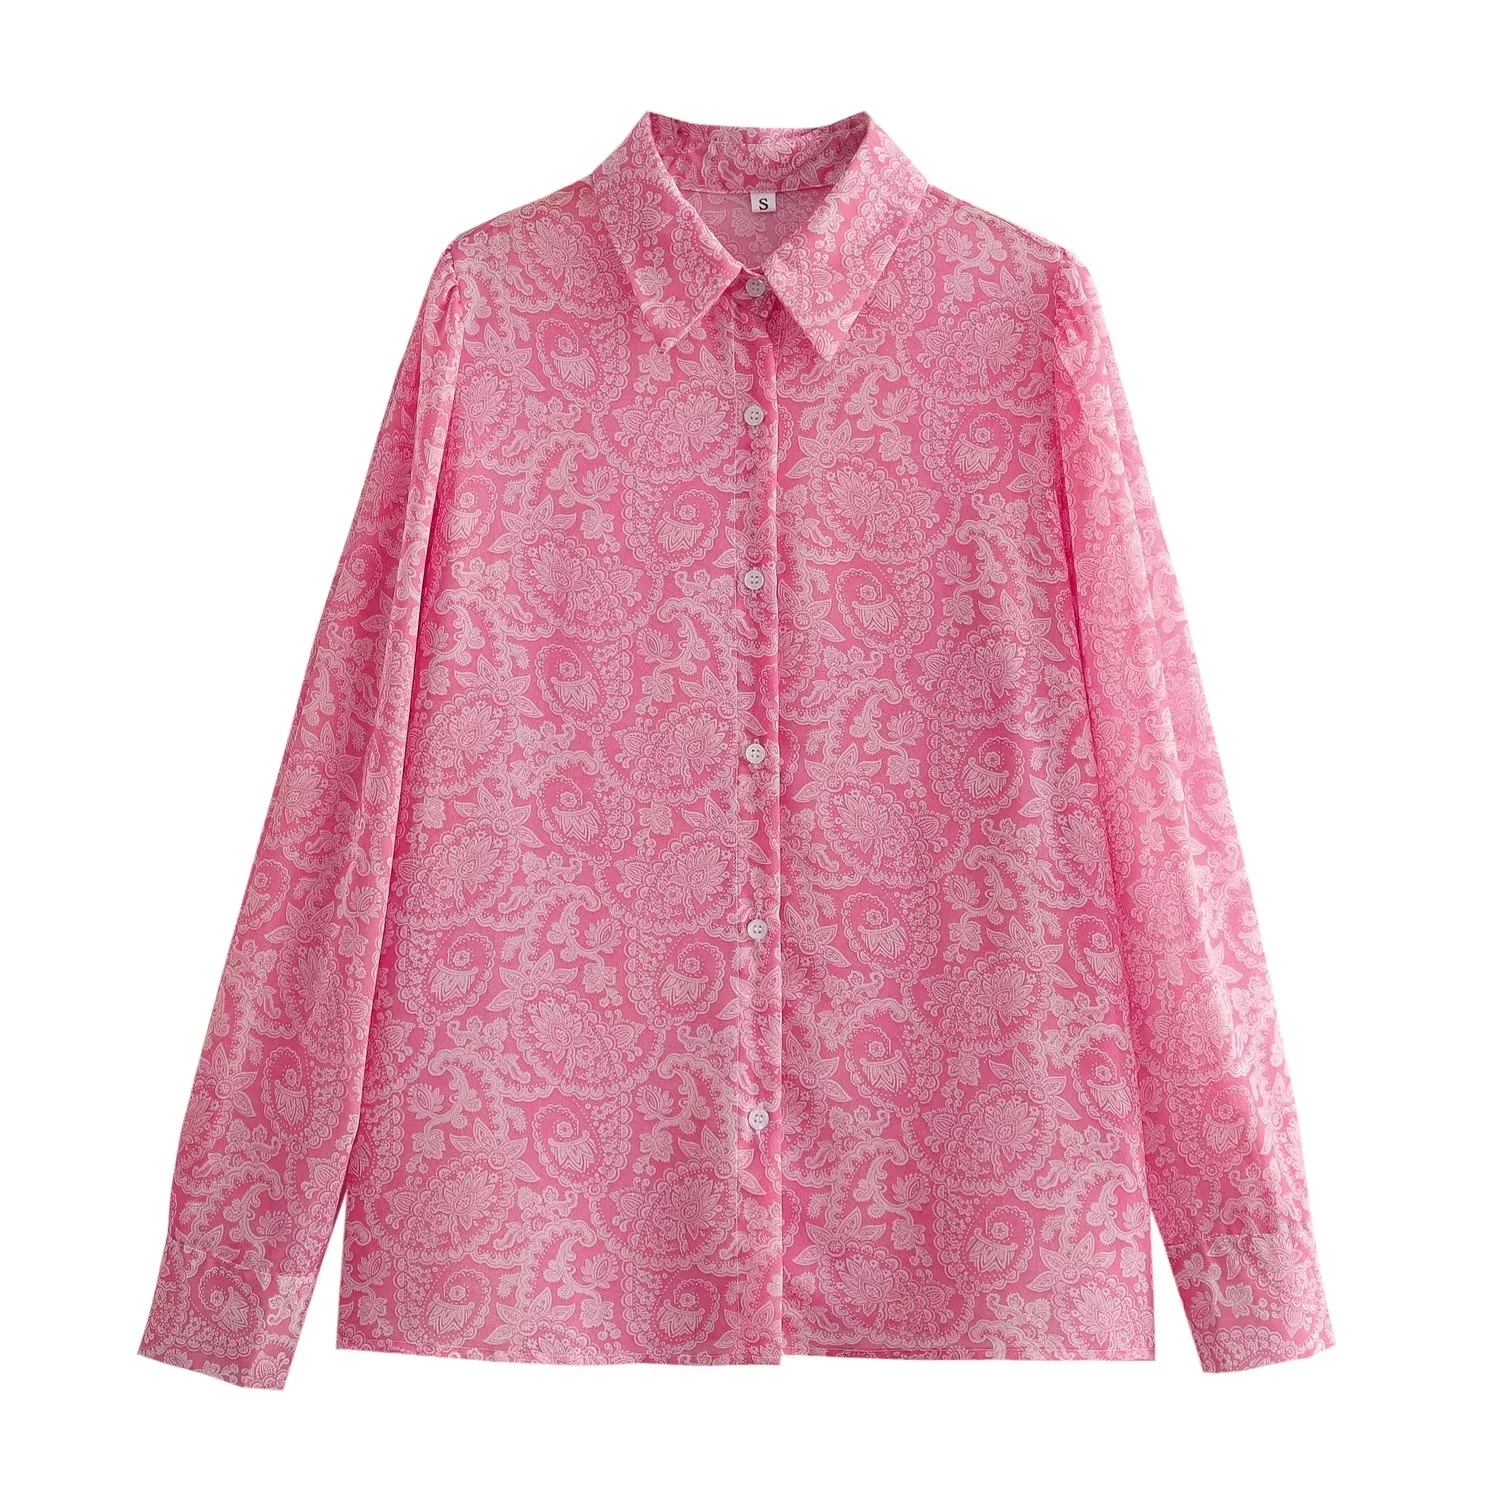 Fashion Pink Polyester Lapel Printed Shirt Skirt Suit,Blouses